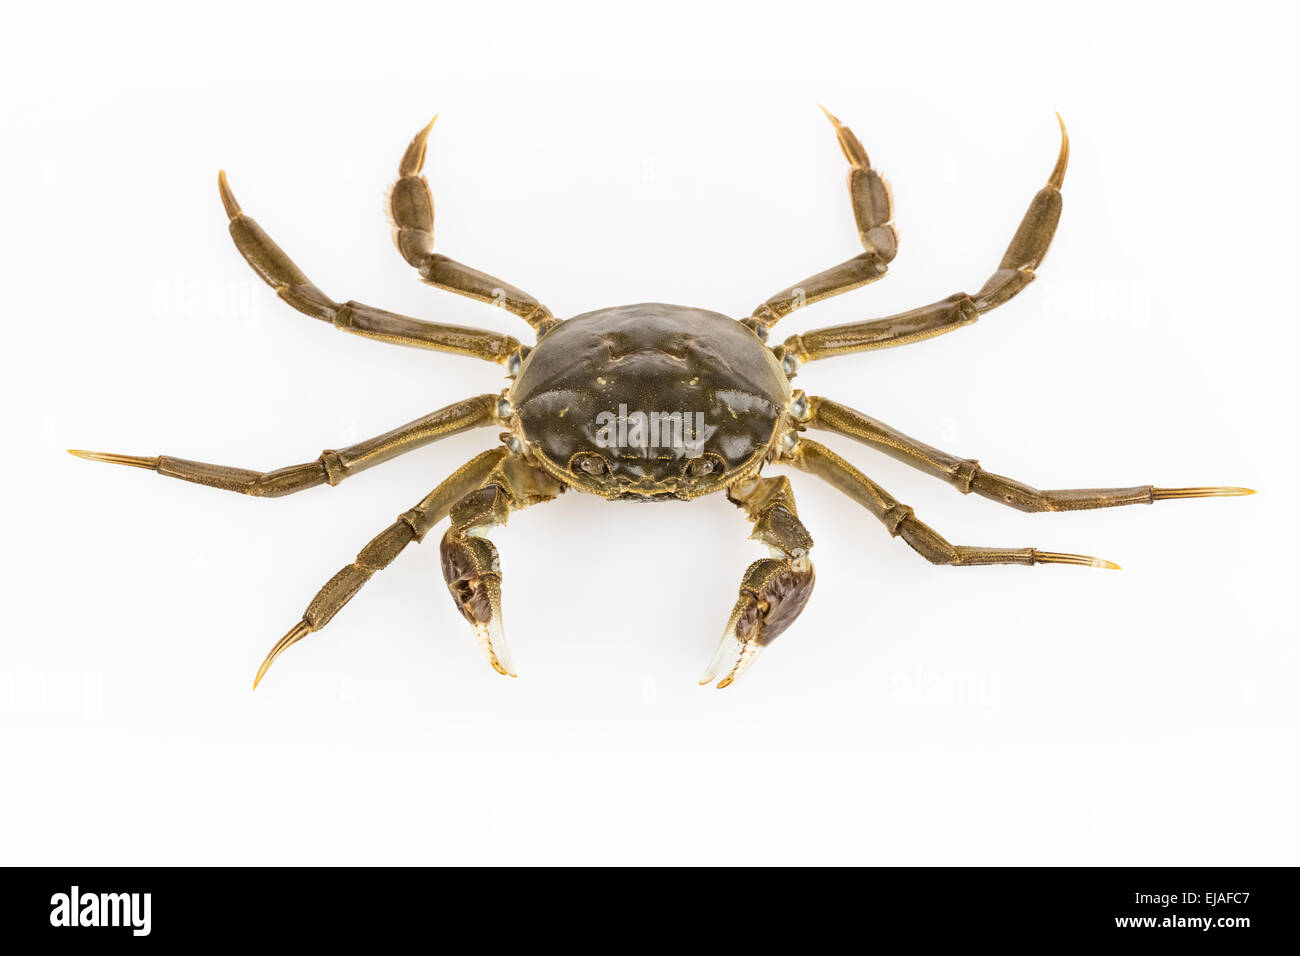 living hairy crab isolated Stock Photo